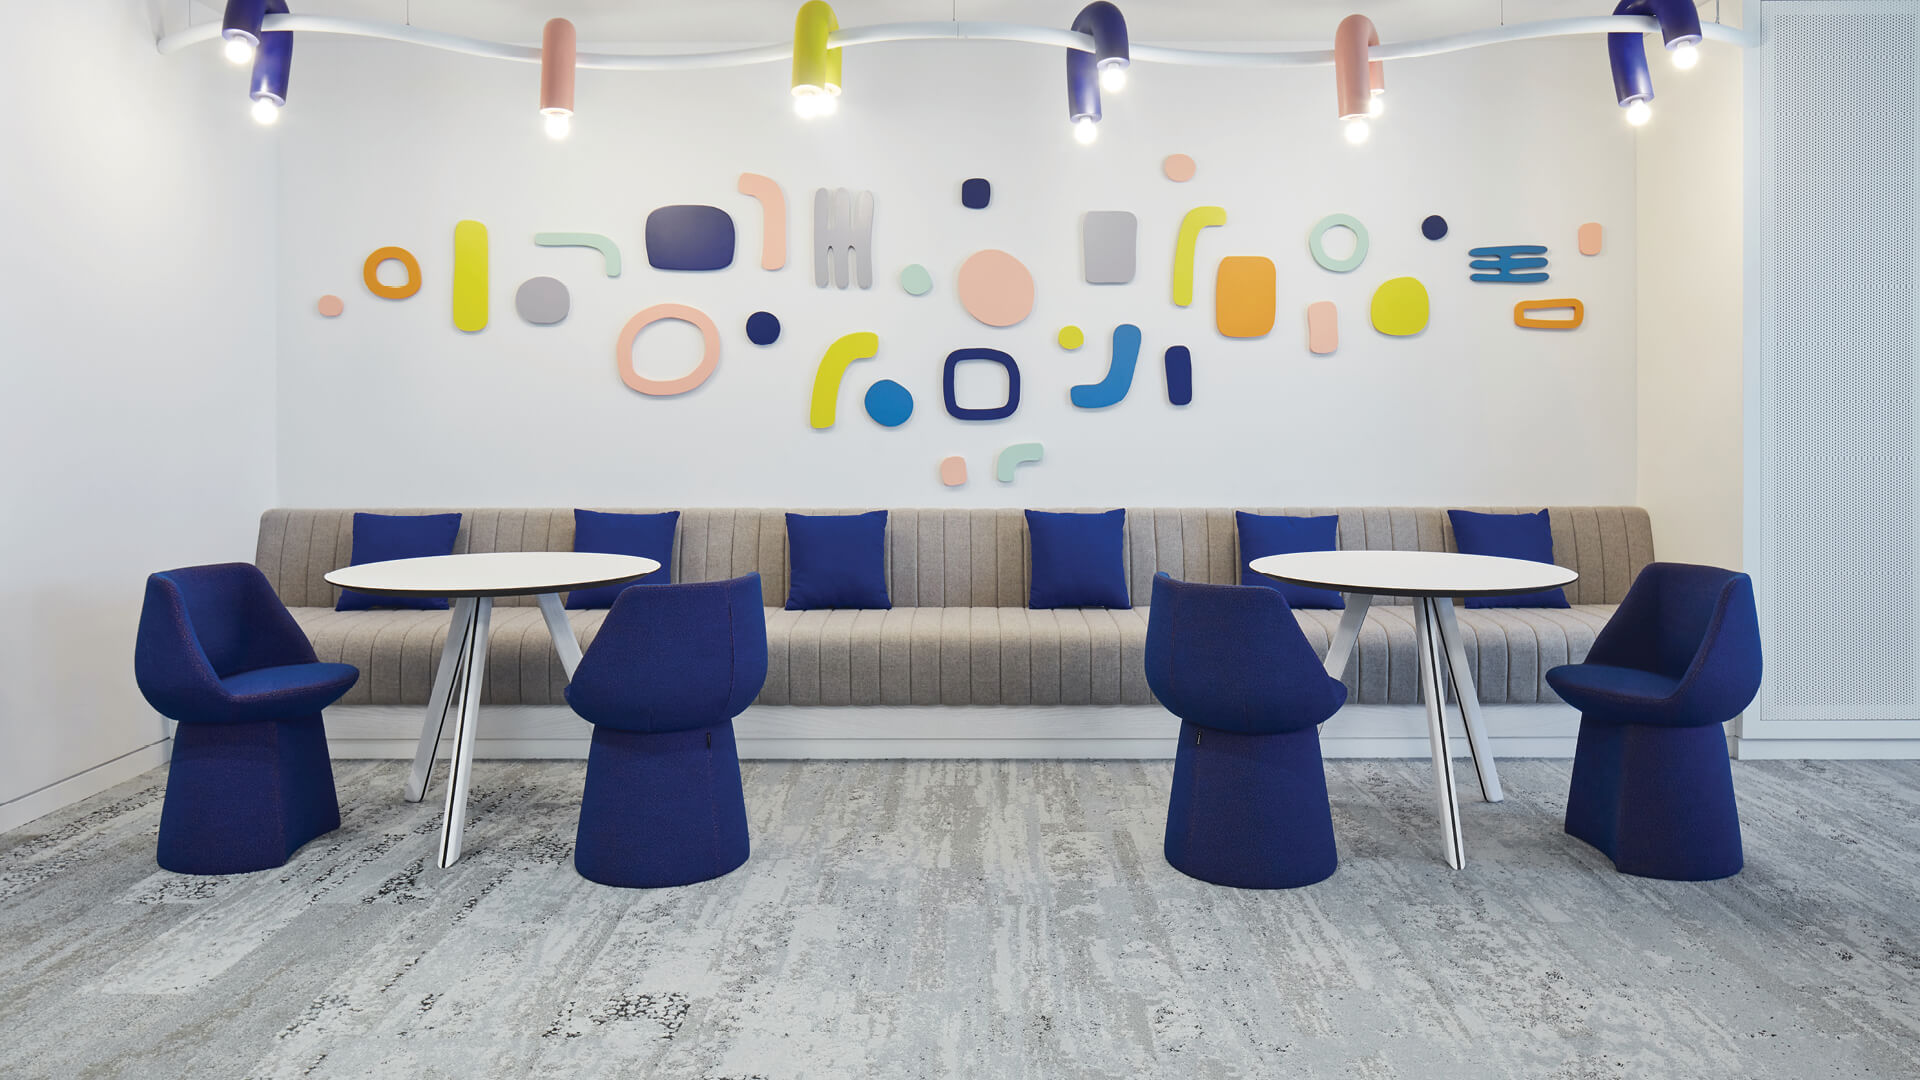 Roar’s cheery workspace interiors for Early Childhood Authority champions child’s play